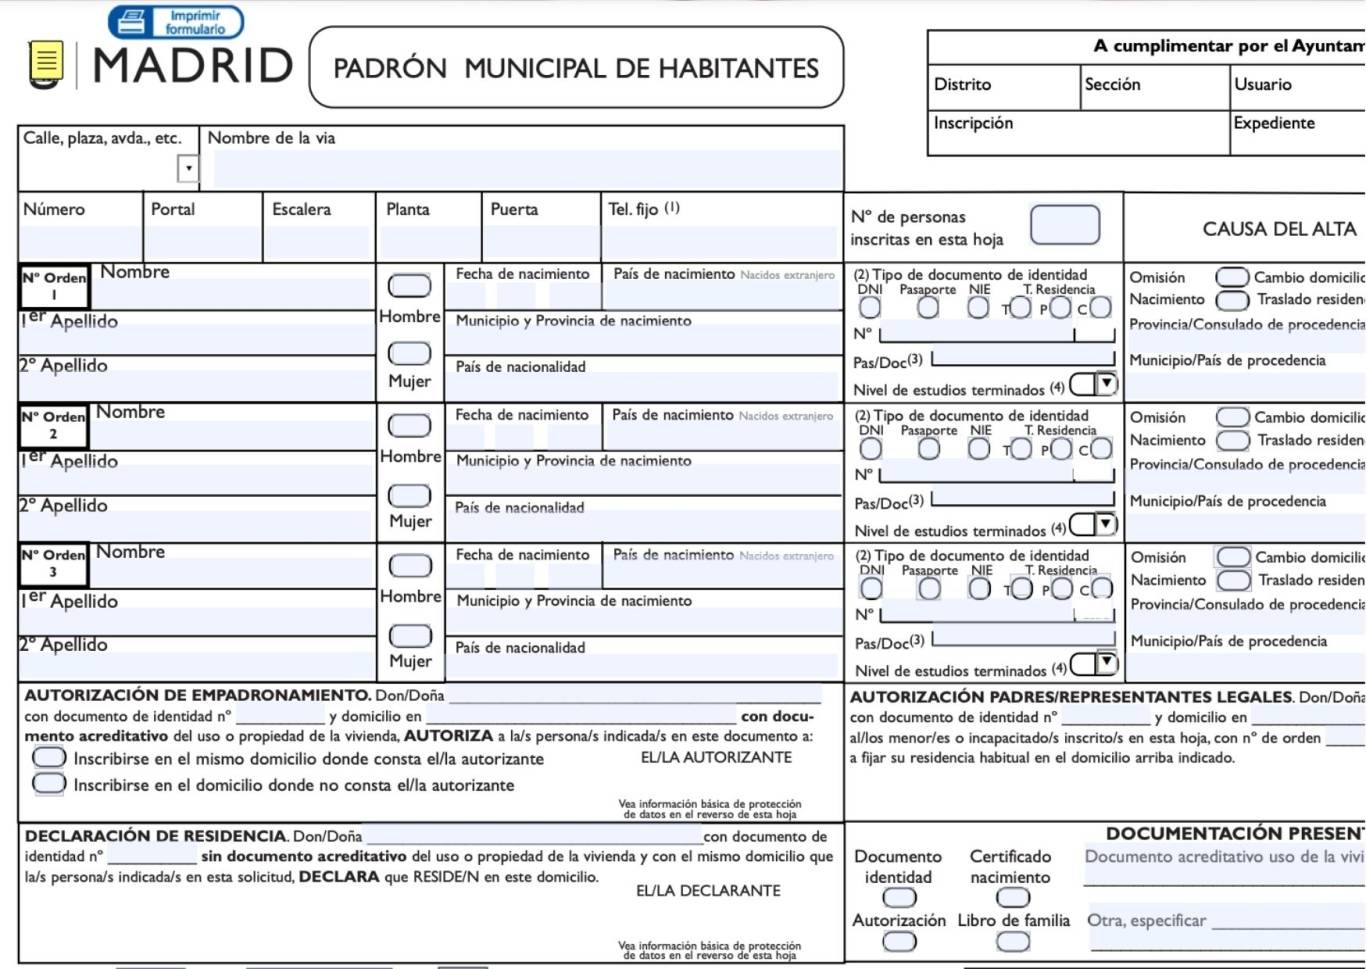 How to get empadronamiento in Spain-city hall registration